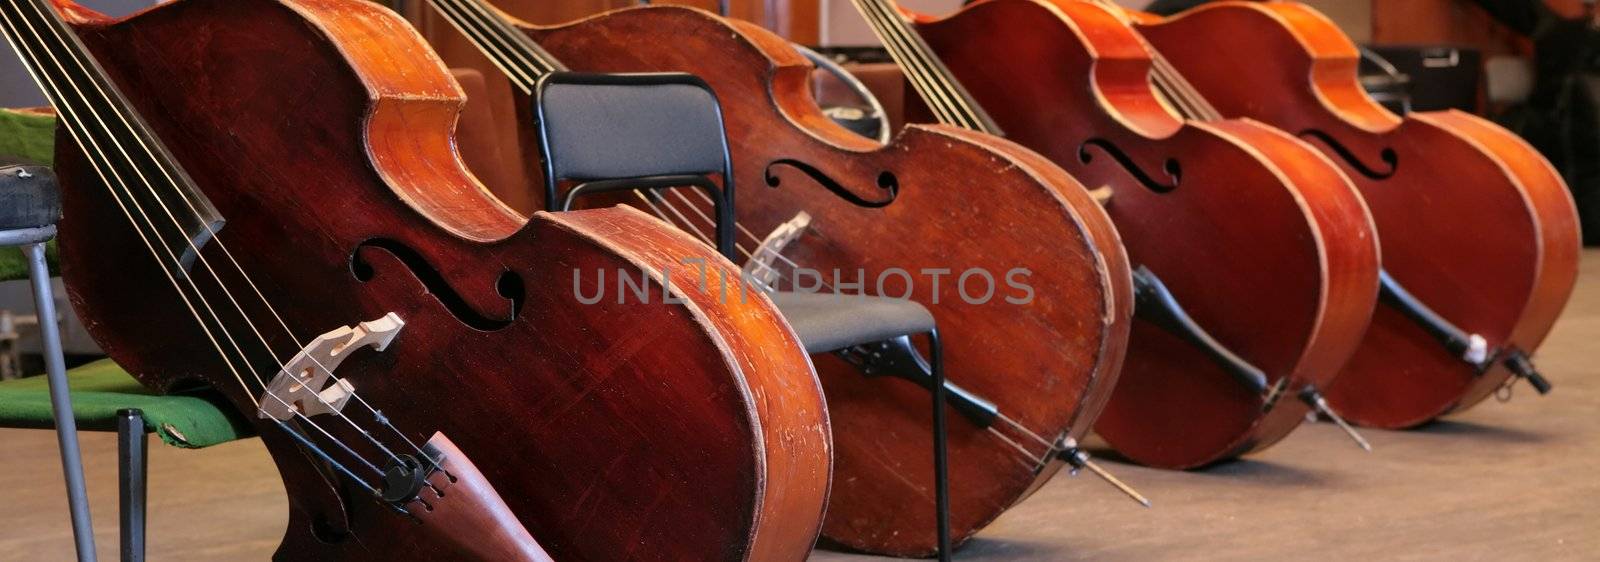 Vintage, music instruments, four old bass viols